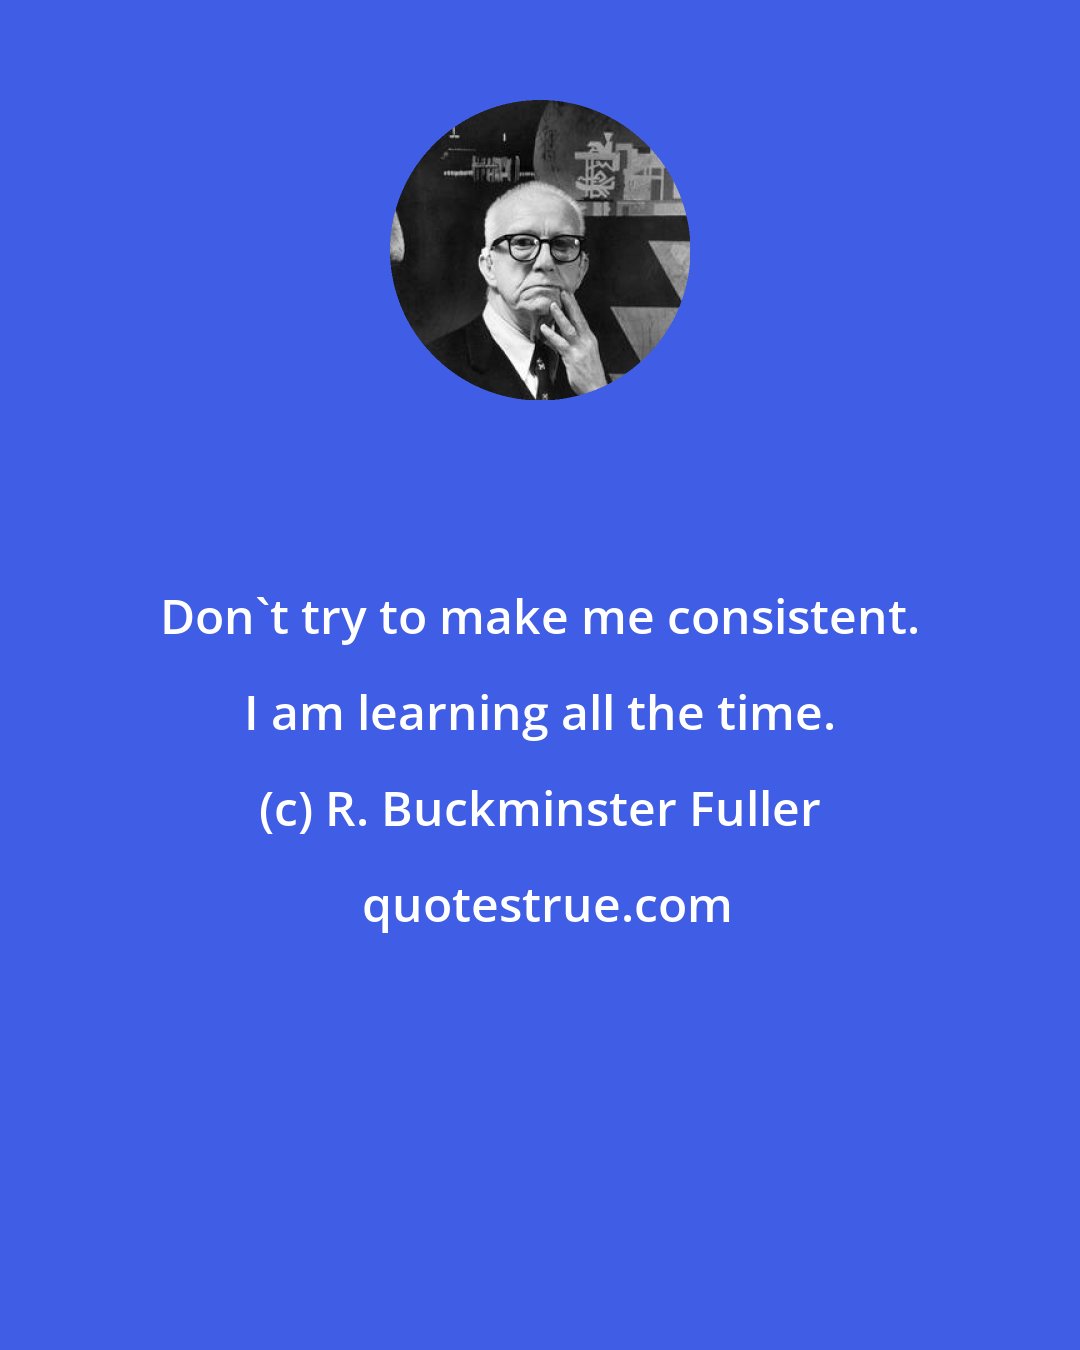 R. Buckminster Fuller: Don't try to make me consistent. I am learning all the time.